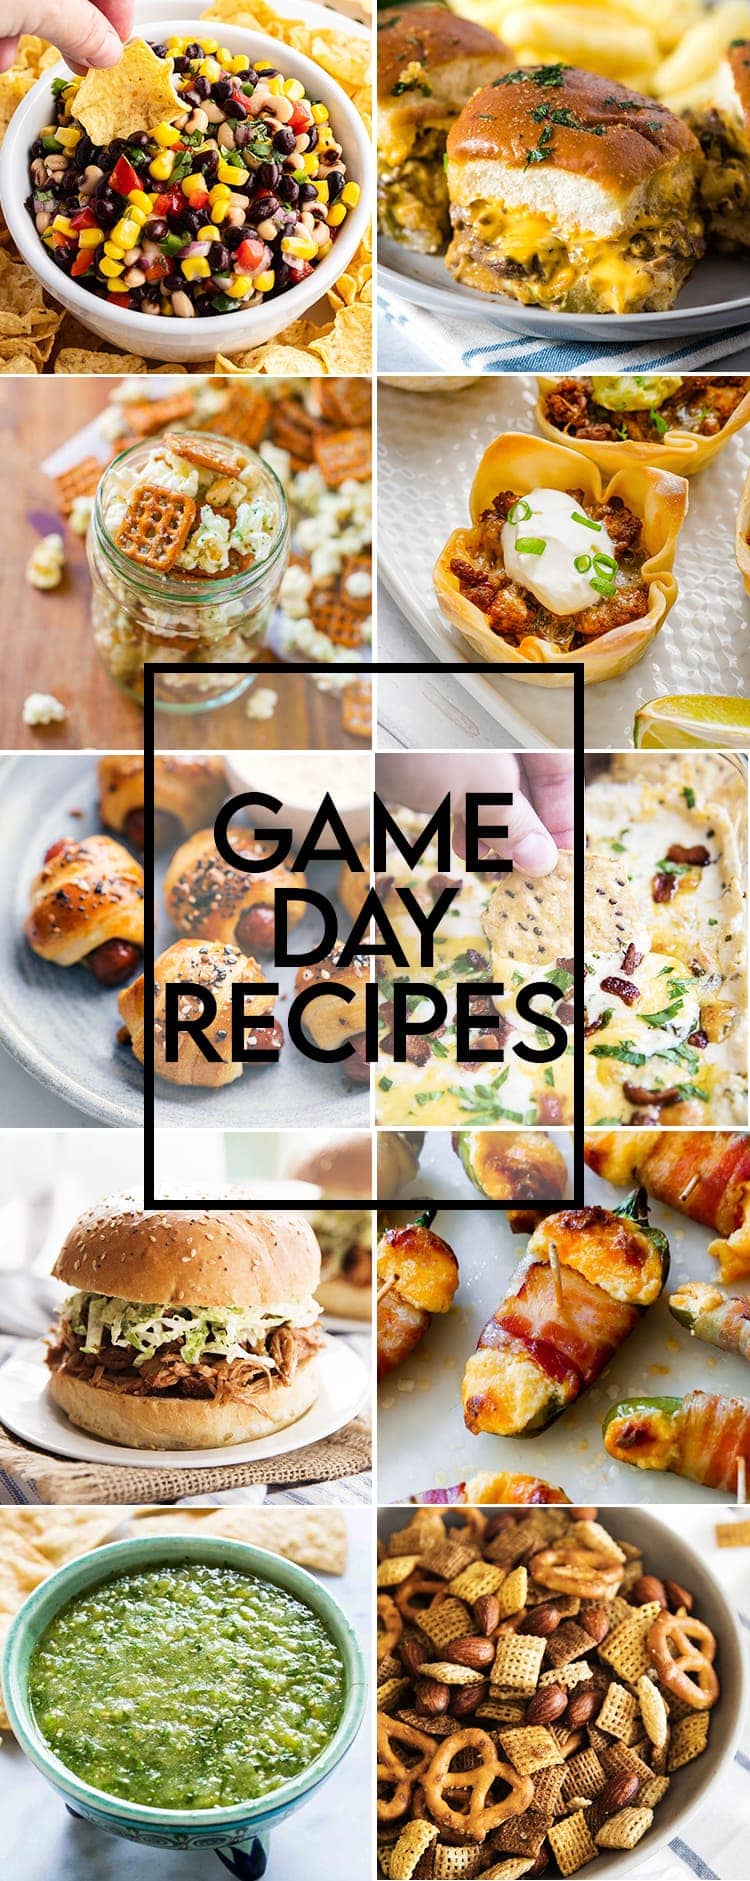 Title card for game day recipes with collage of related images behind.